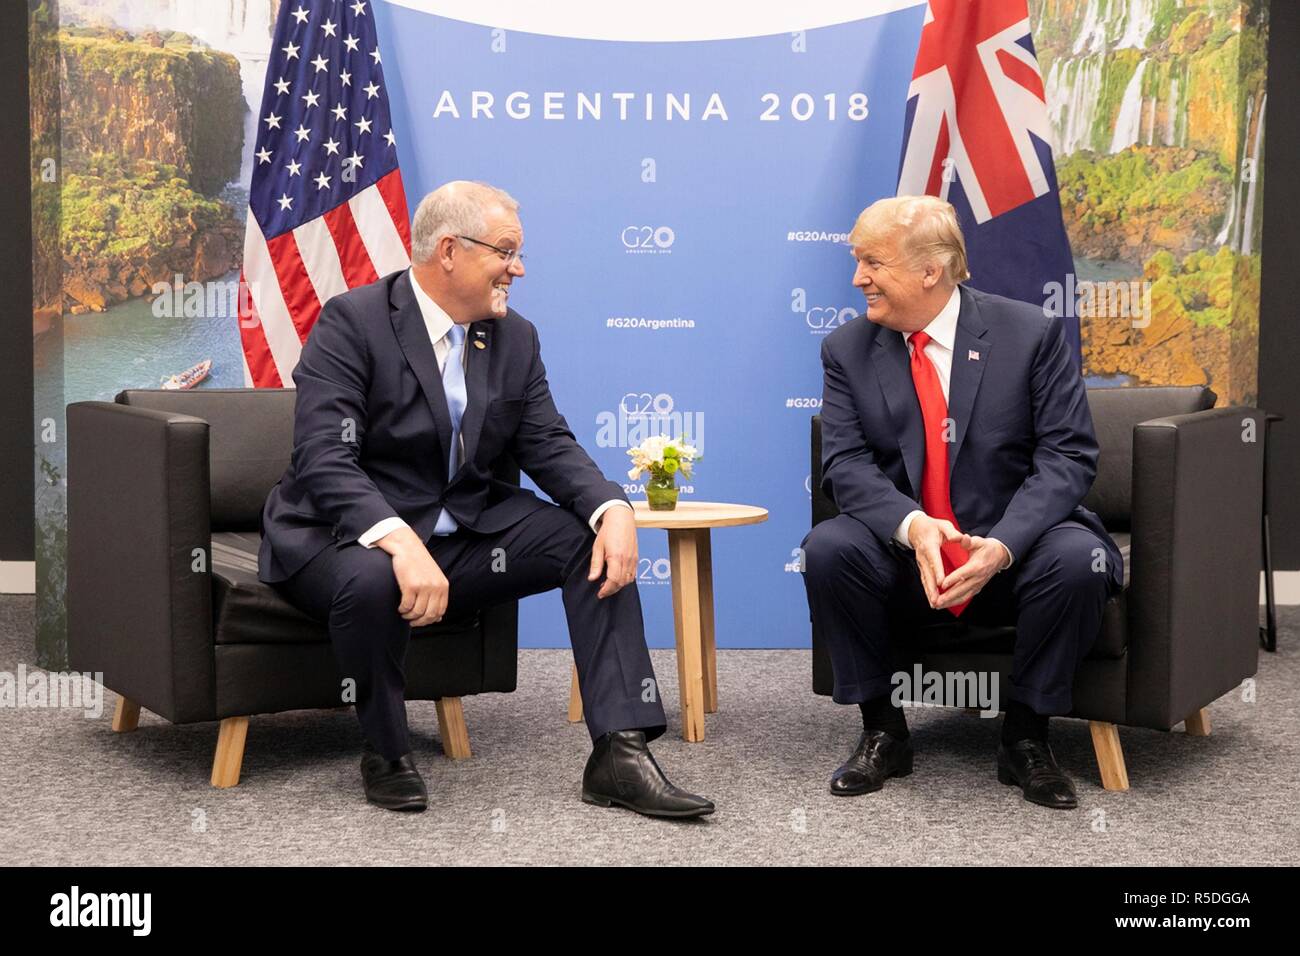 Buenos Aires, Argentina. 1st December, 2018. Buenos Aires, Argentina. 30th November 2018. U.S. President Donald Trump during a bilateral meeting with Australian Prime Minister Scott Morrison on the sidelines of the G20 Summit meeting at the Costa Salguero Center November 30, 2018 in Buenos Aires, Argentina. Credit: Planetpix/Alamy Live News Credit: Planetpix/Alamy Live News Stock Photo